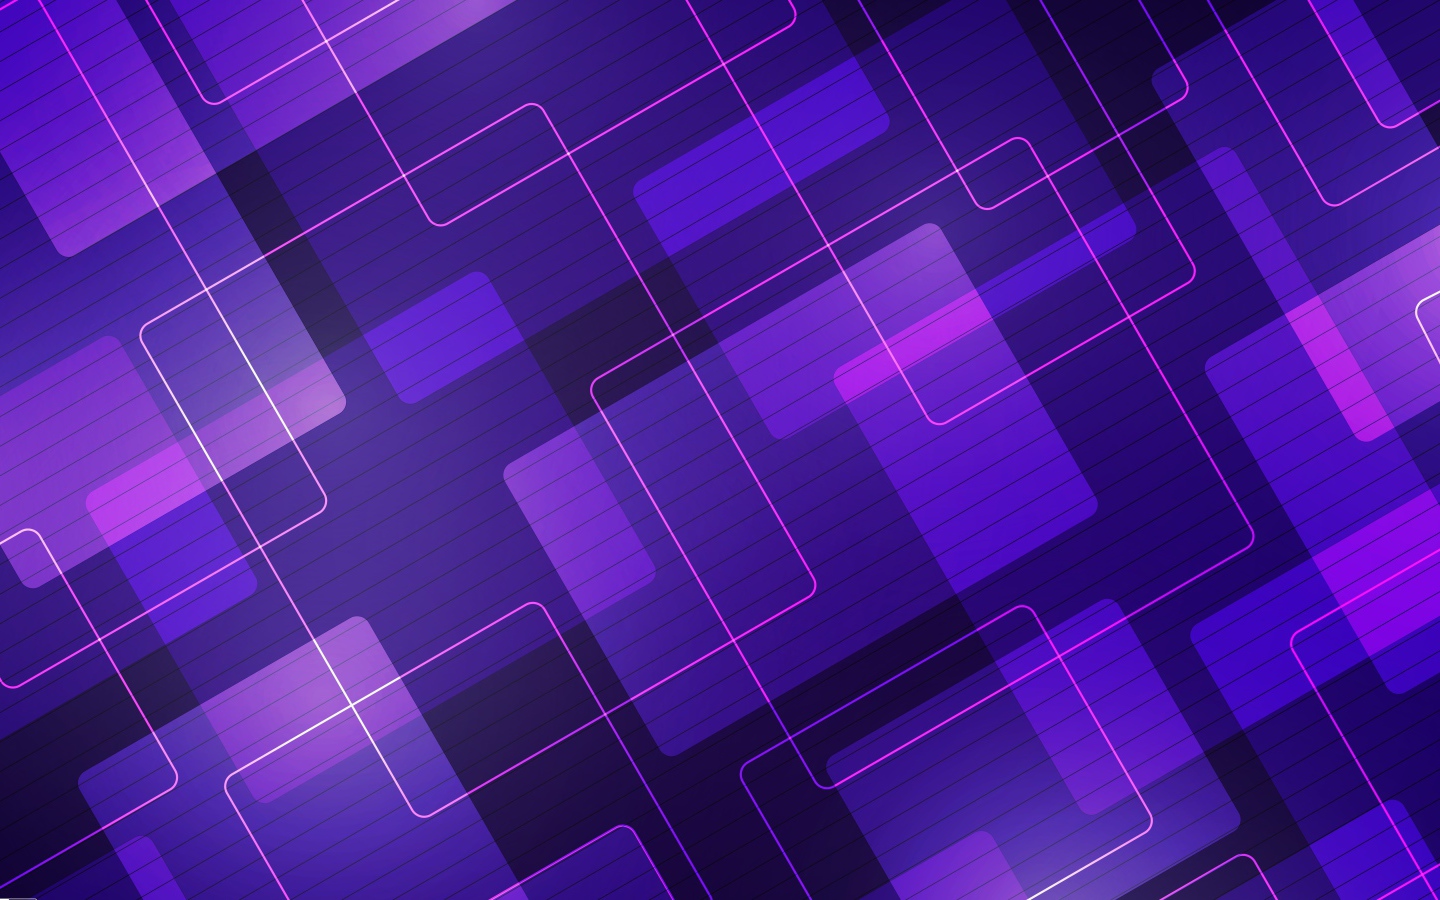 Purple background with geometric shapes.